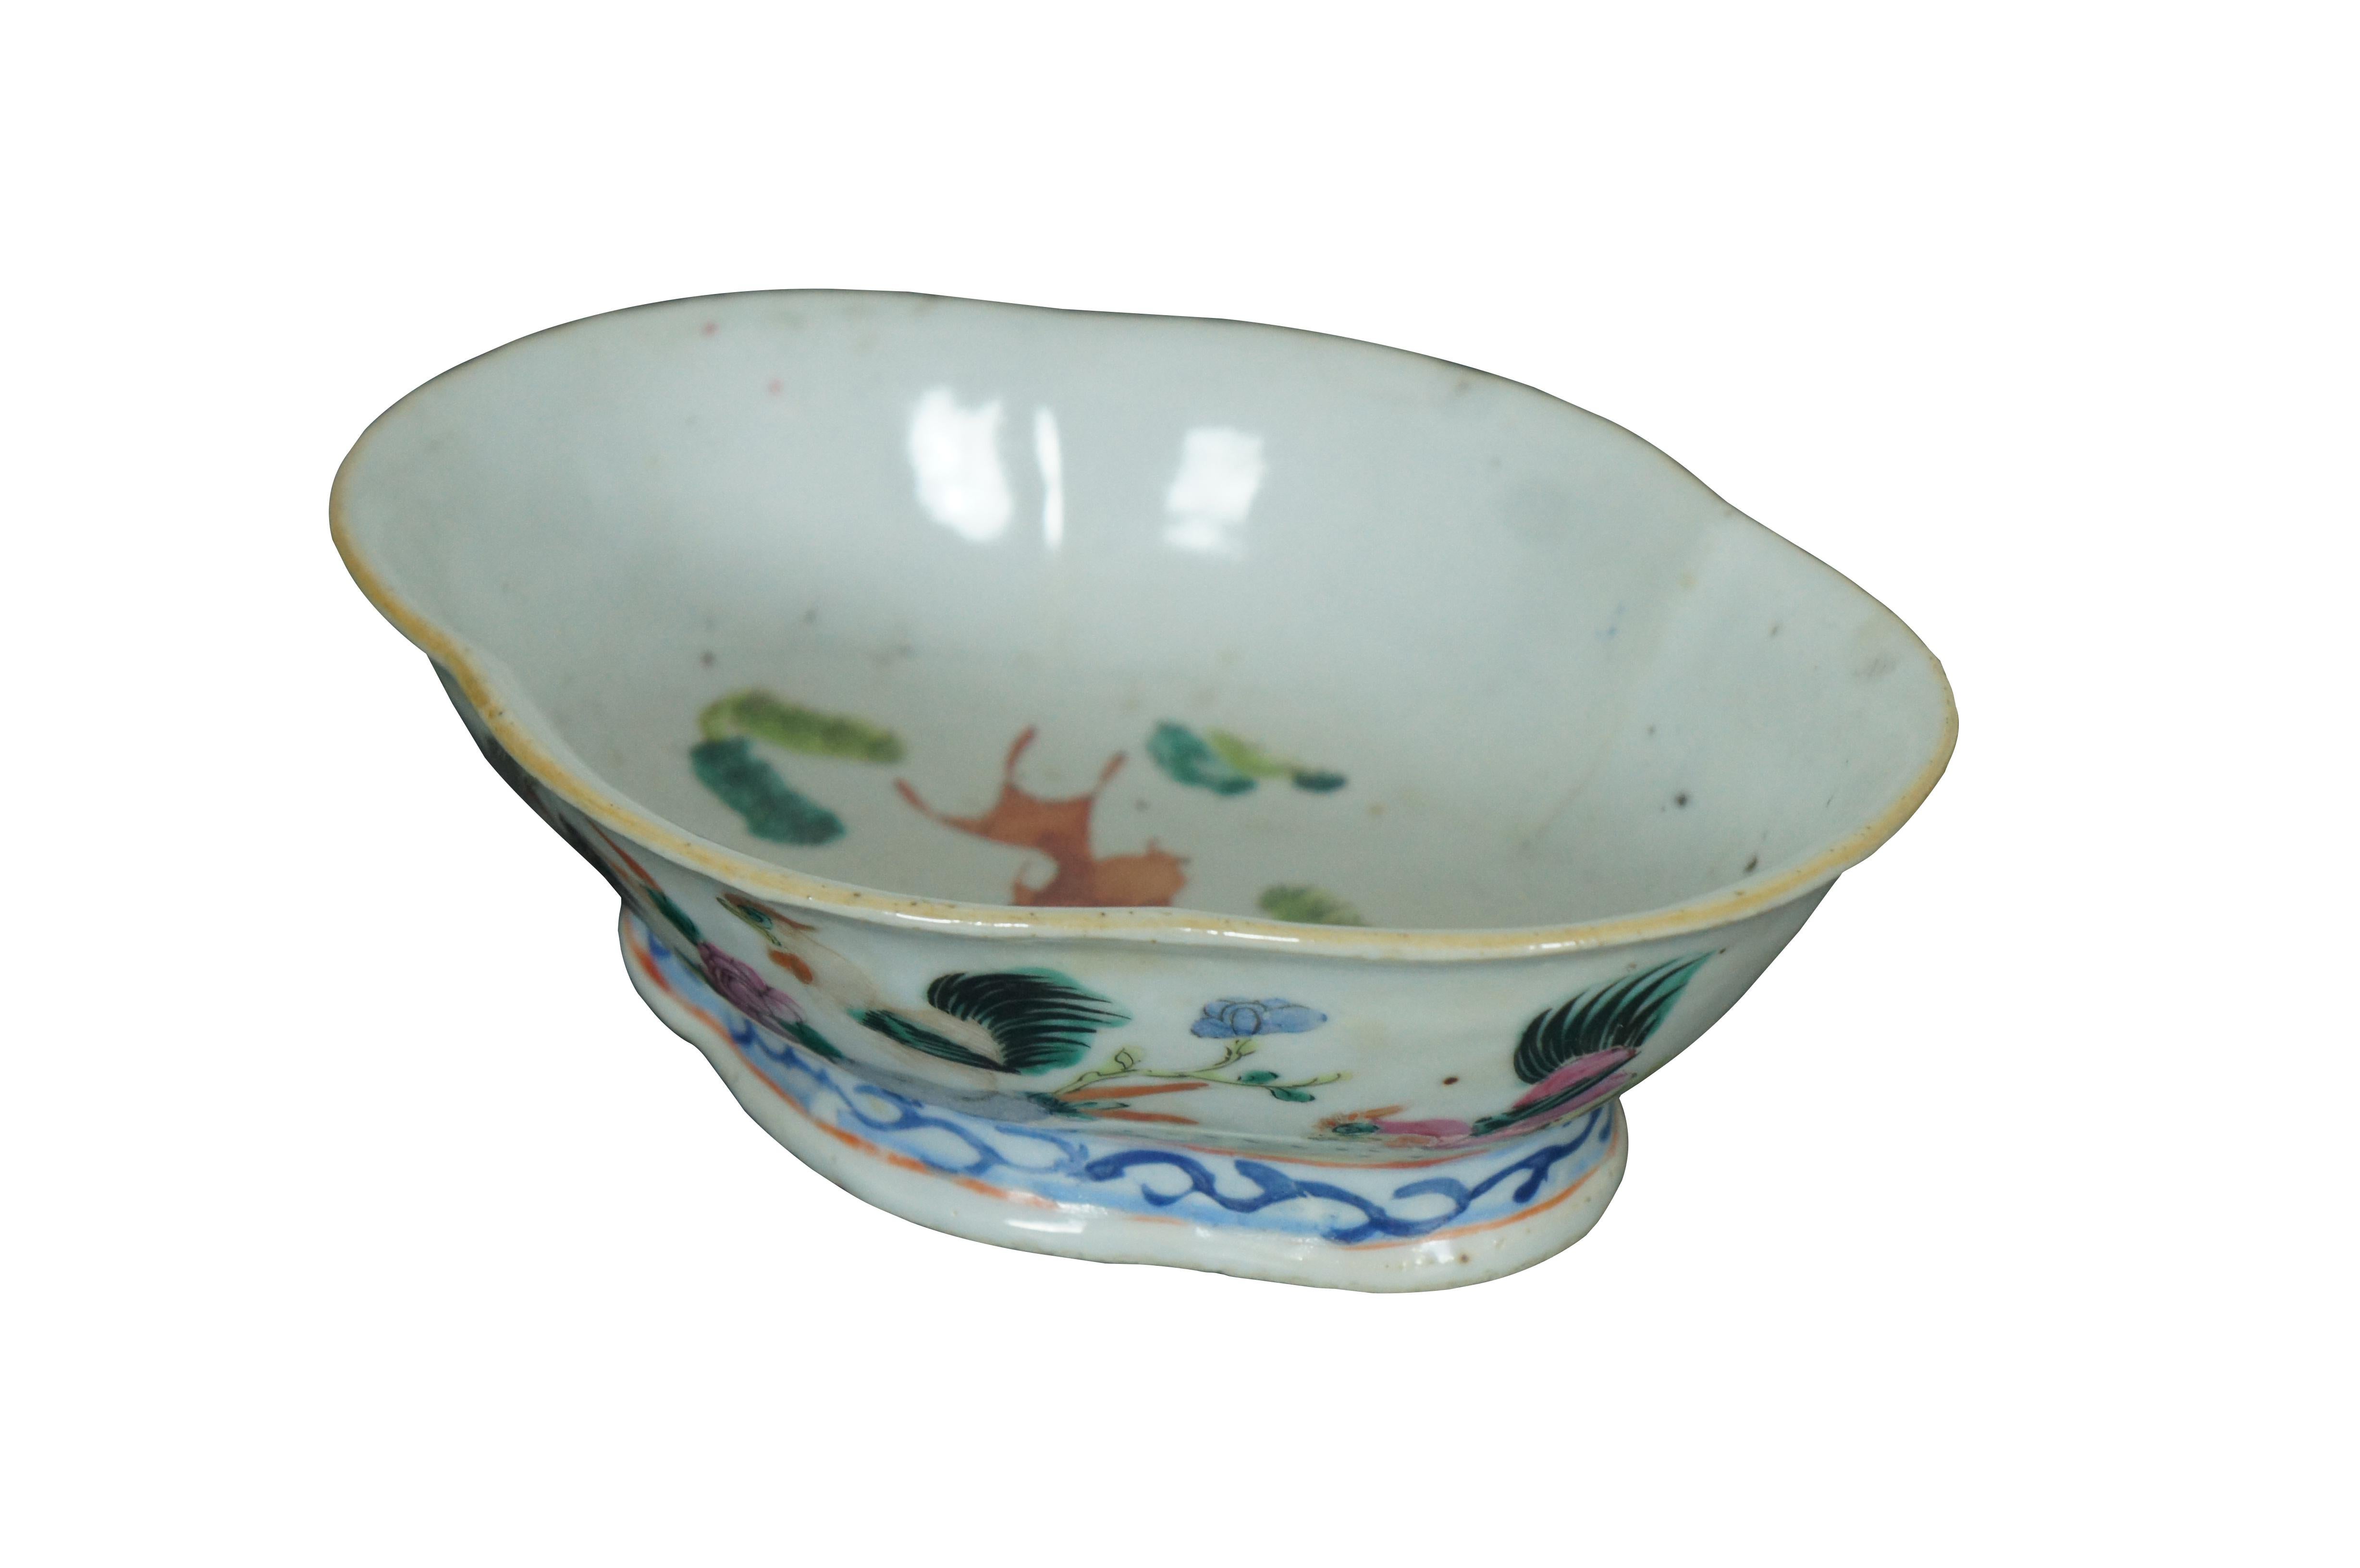 An impressive mid 19th century Chinese Export Bowl.  Made from porcelain with polychrome rooster and hen design.  Features a lobed / scalloped shape with footed base.  The interior is features a koi fish design.  Great for serving or display. 